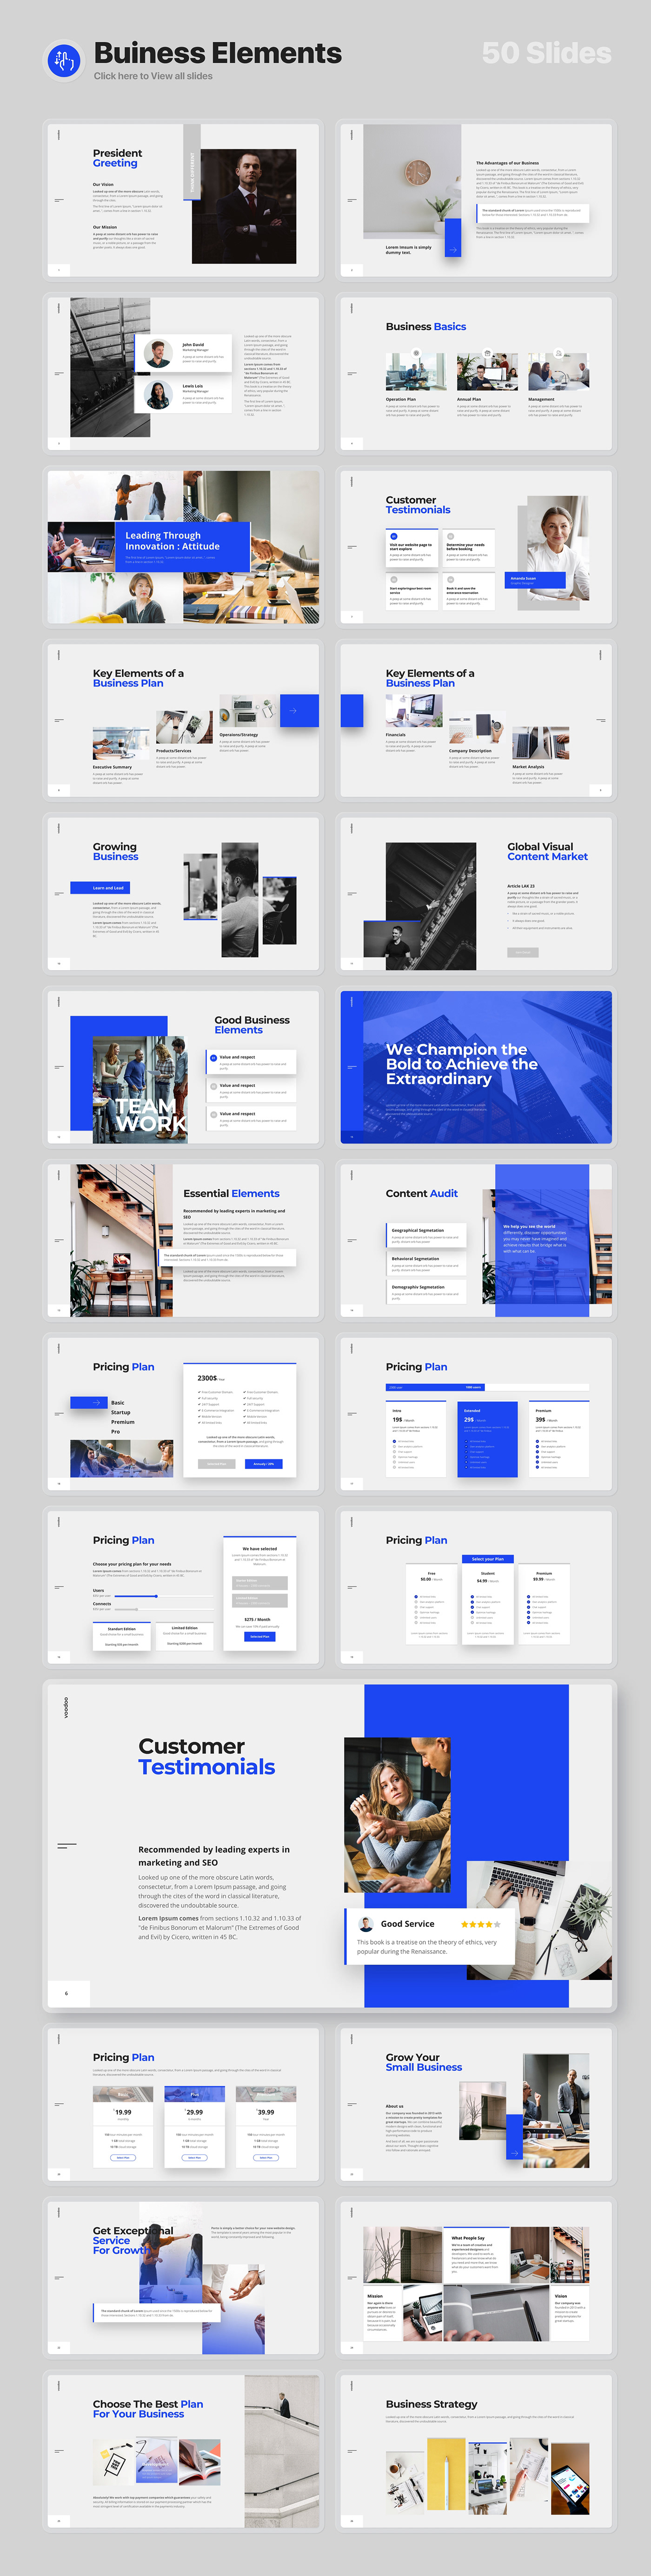 free free powerpoint free keynote Powerpoint Keynote presentation slide free infographic infographic Free Template